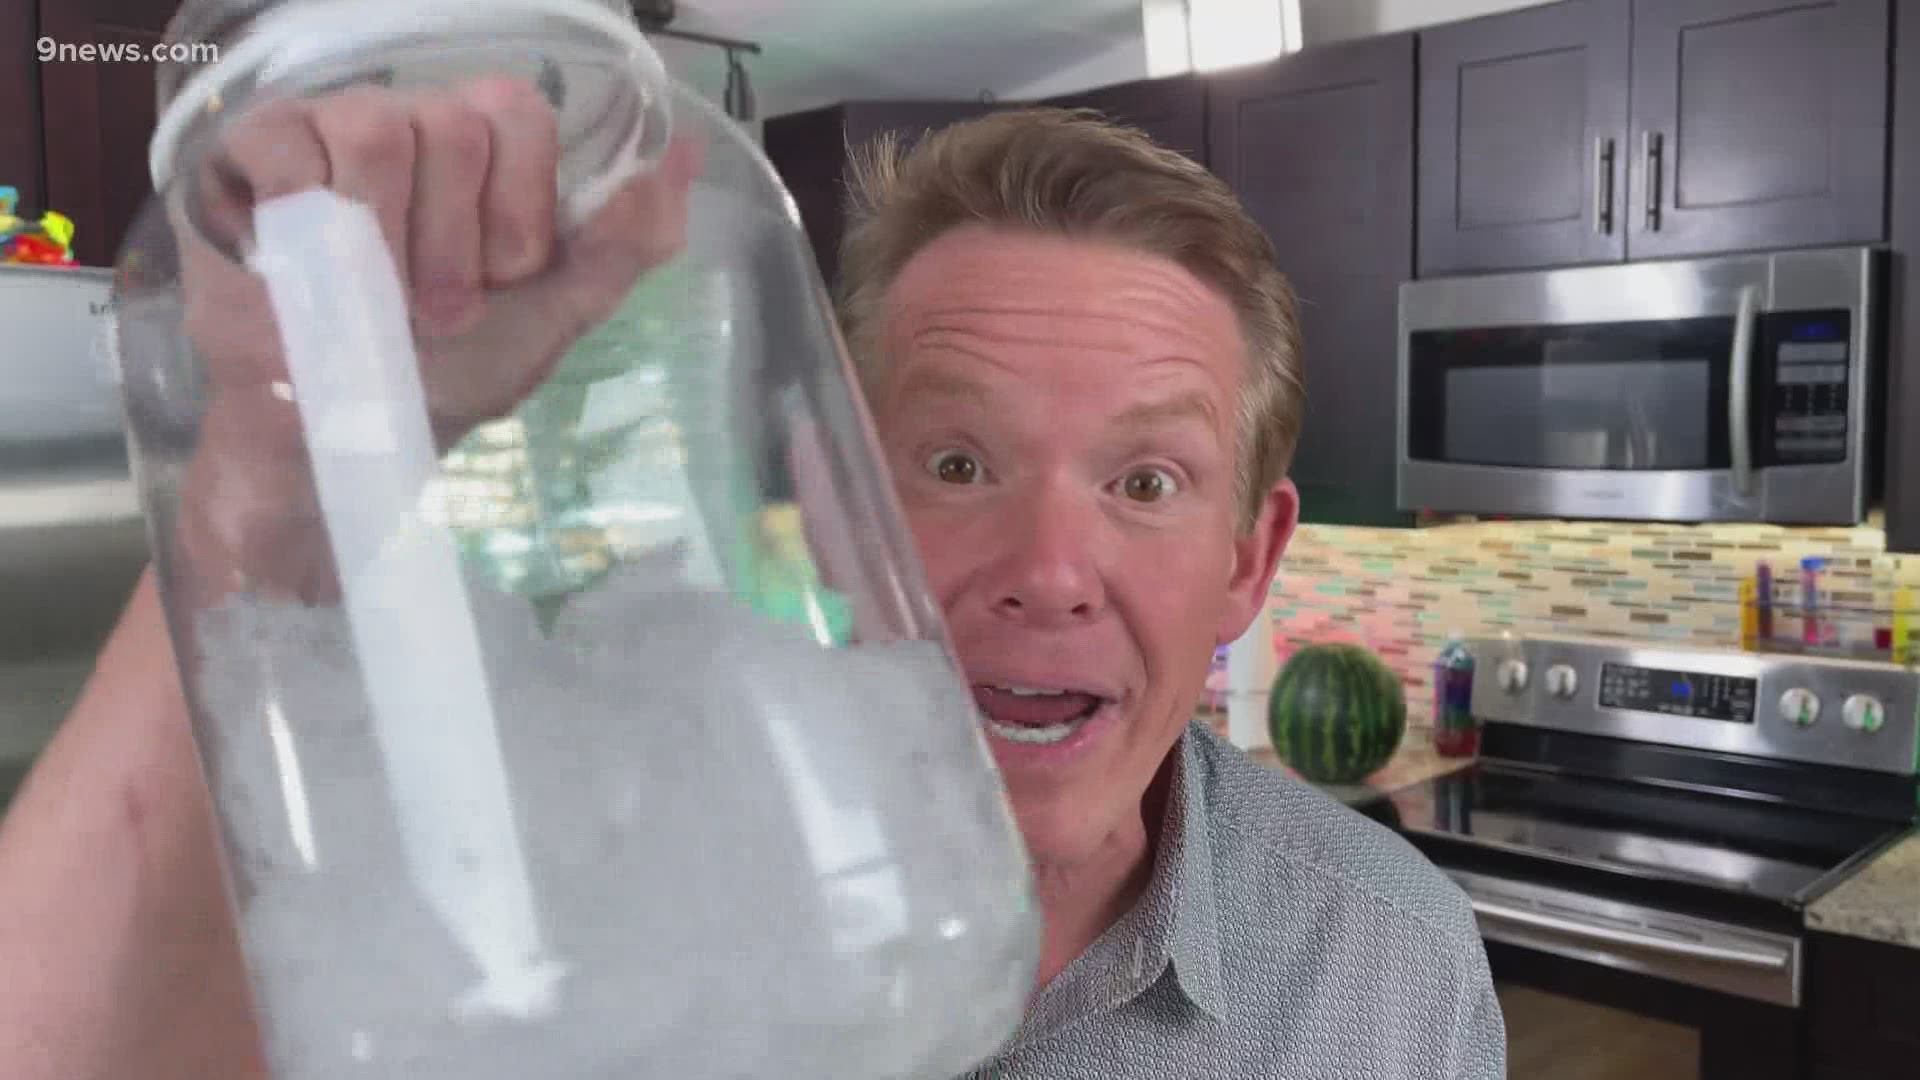 Science guy Steve Spangler shows us how to lower the temperature of ice to make your own refreshing ice cream.